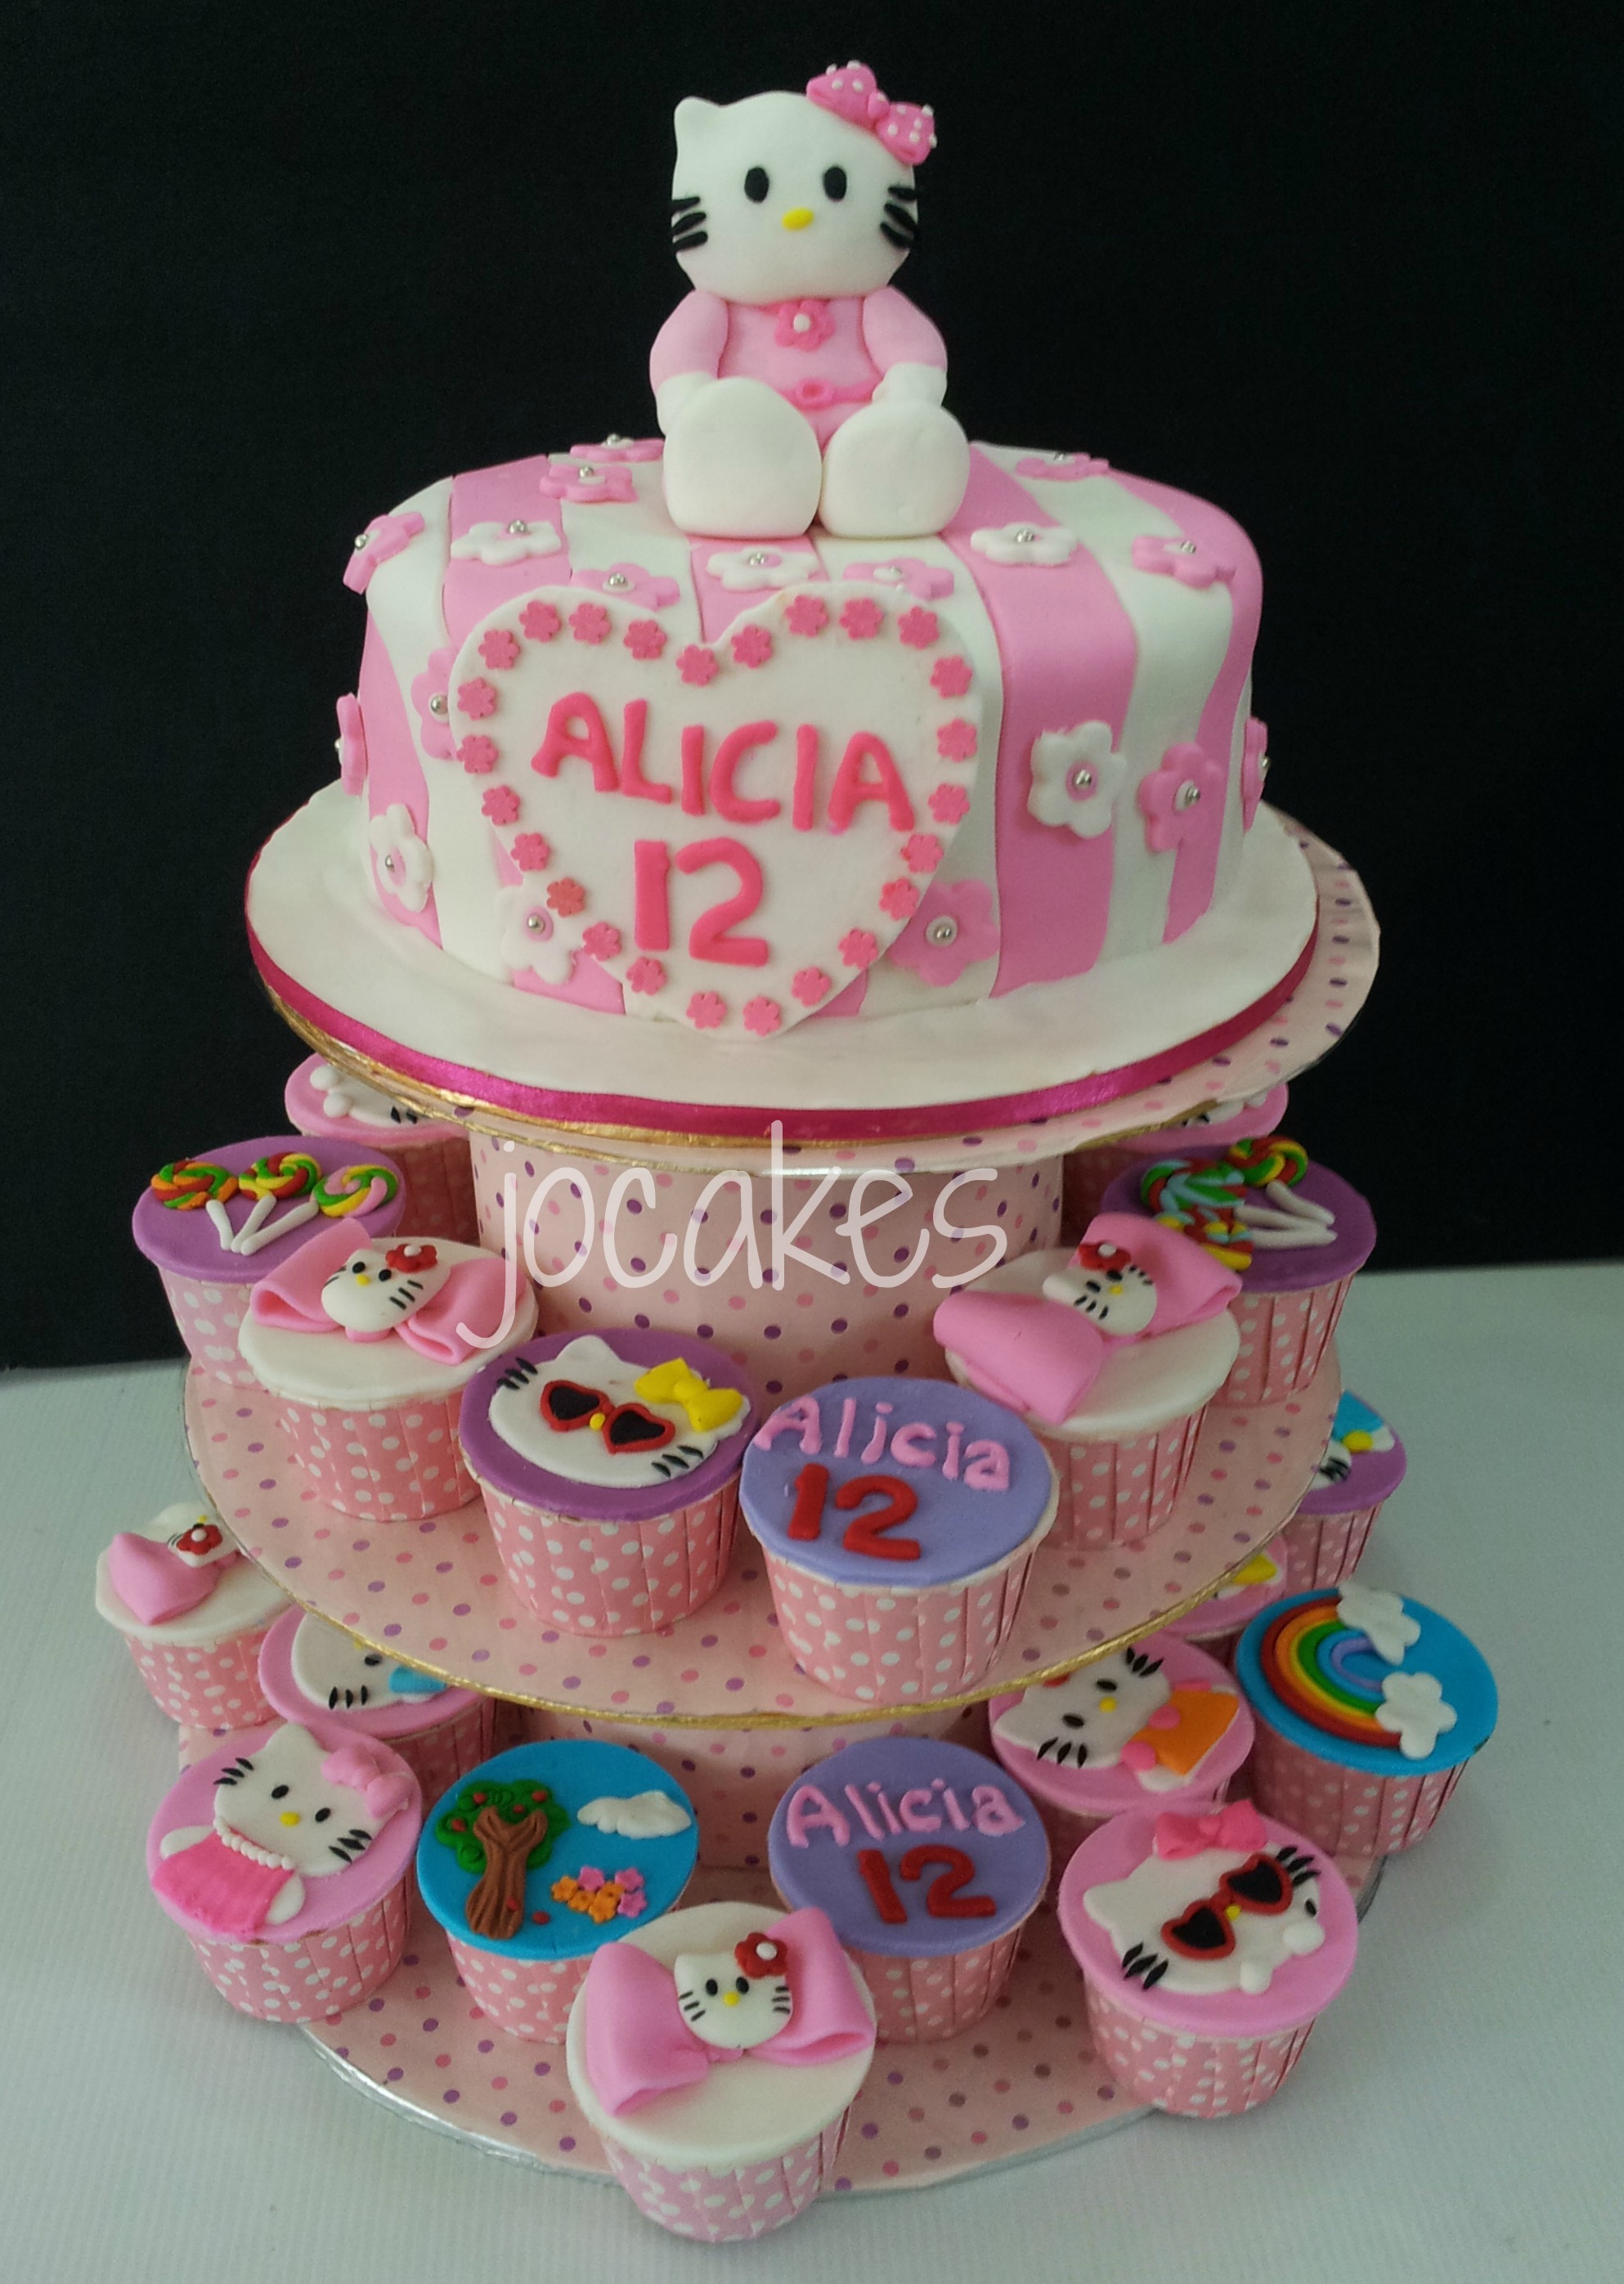 Hello Kitty Cake and Cupcakes